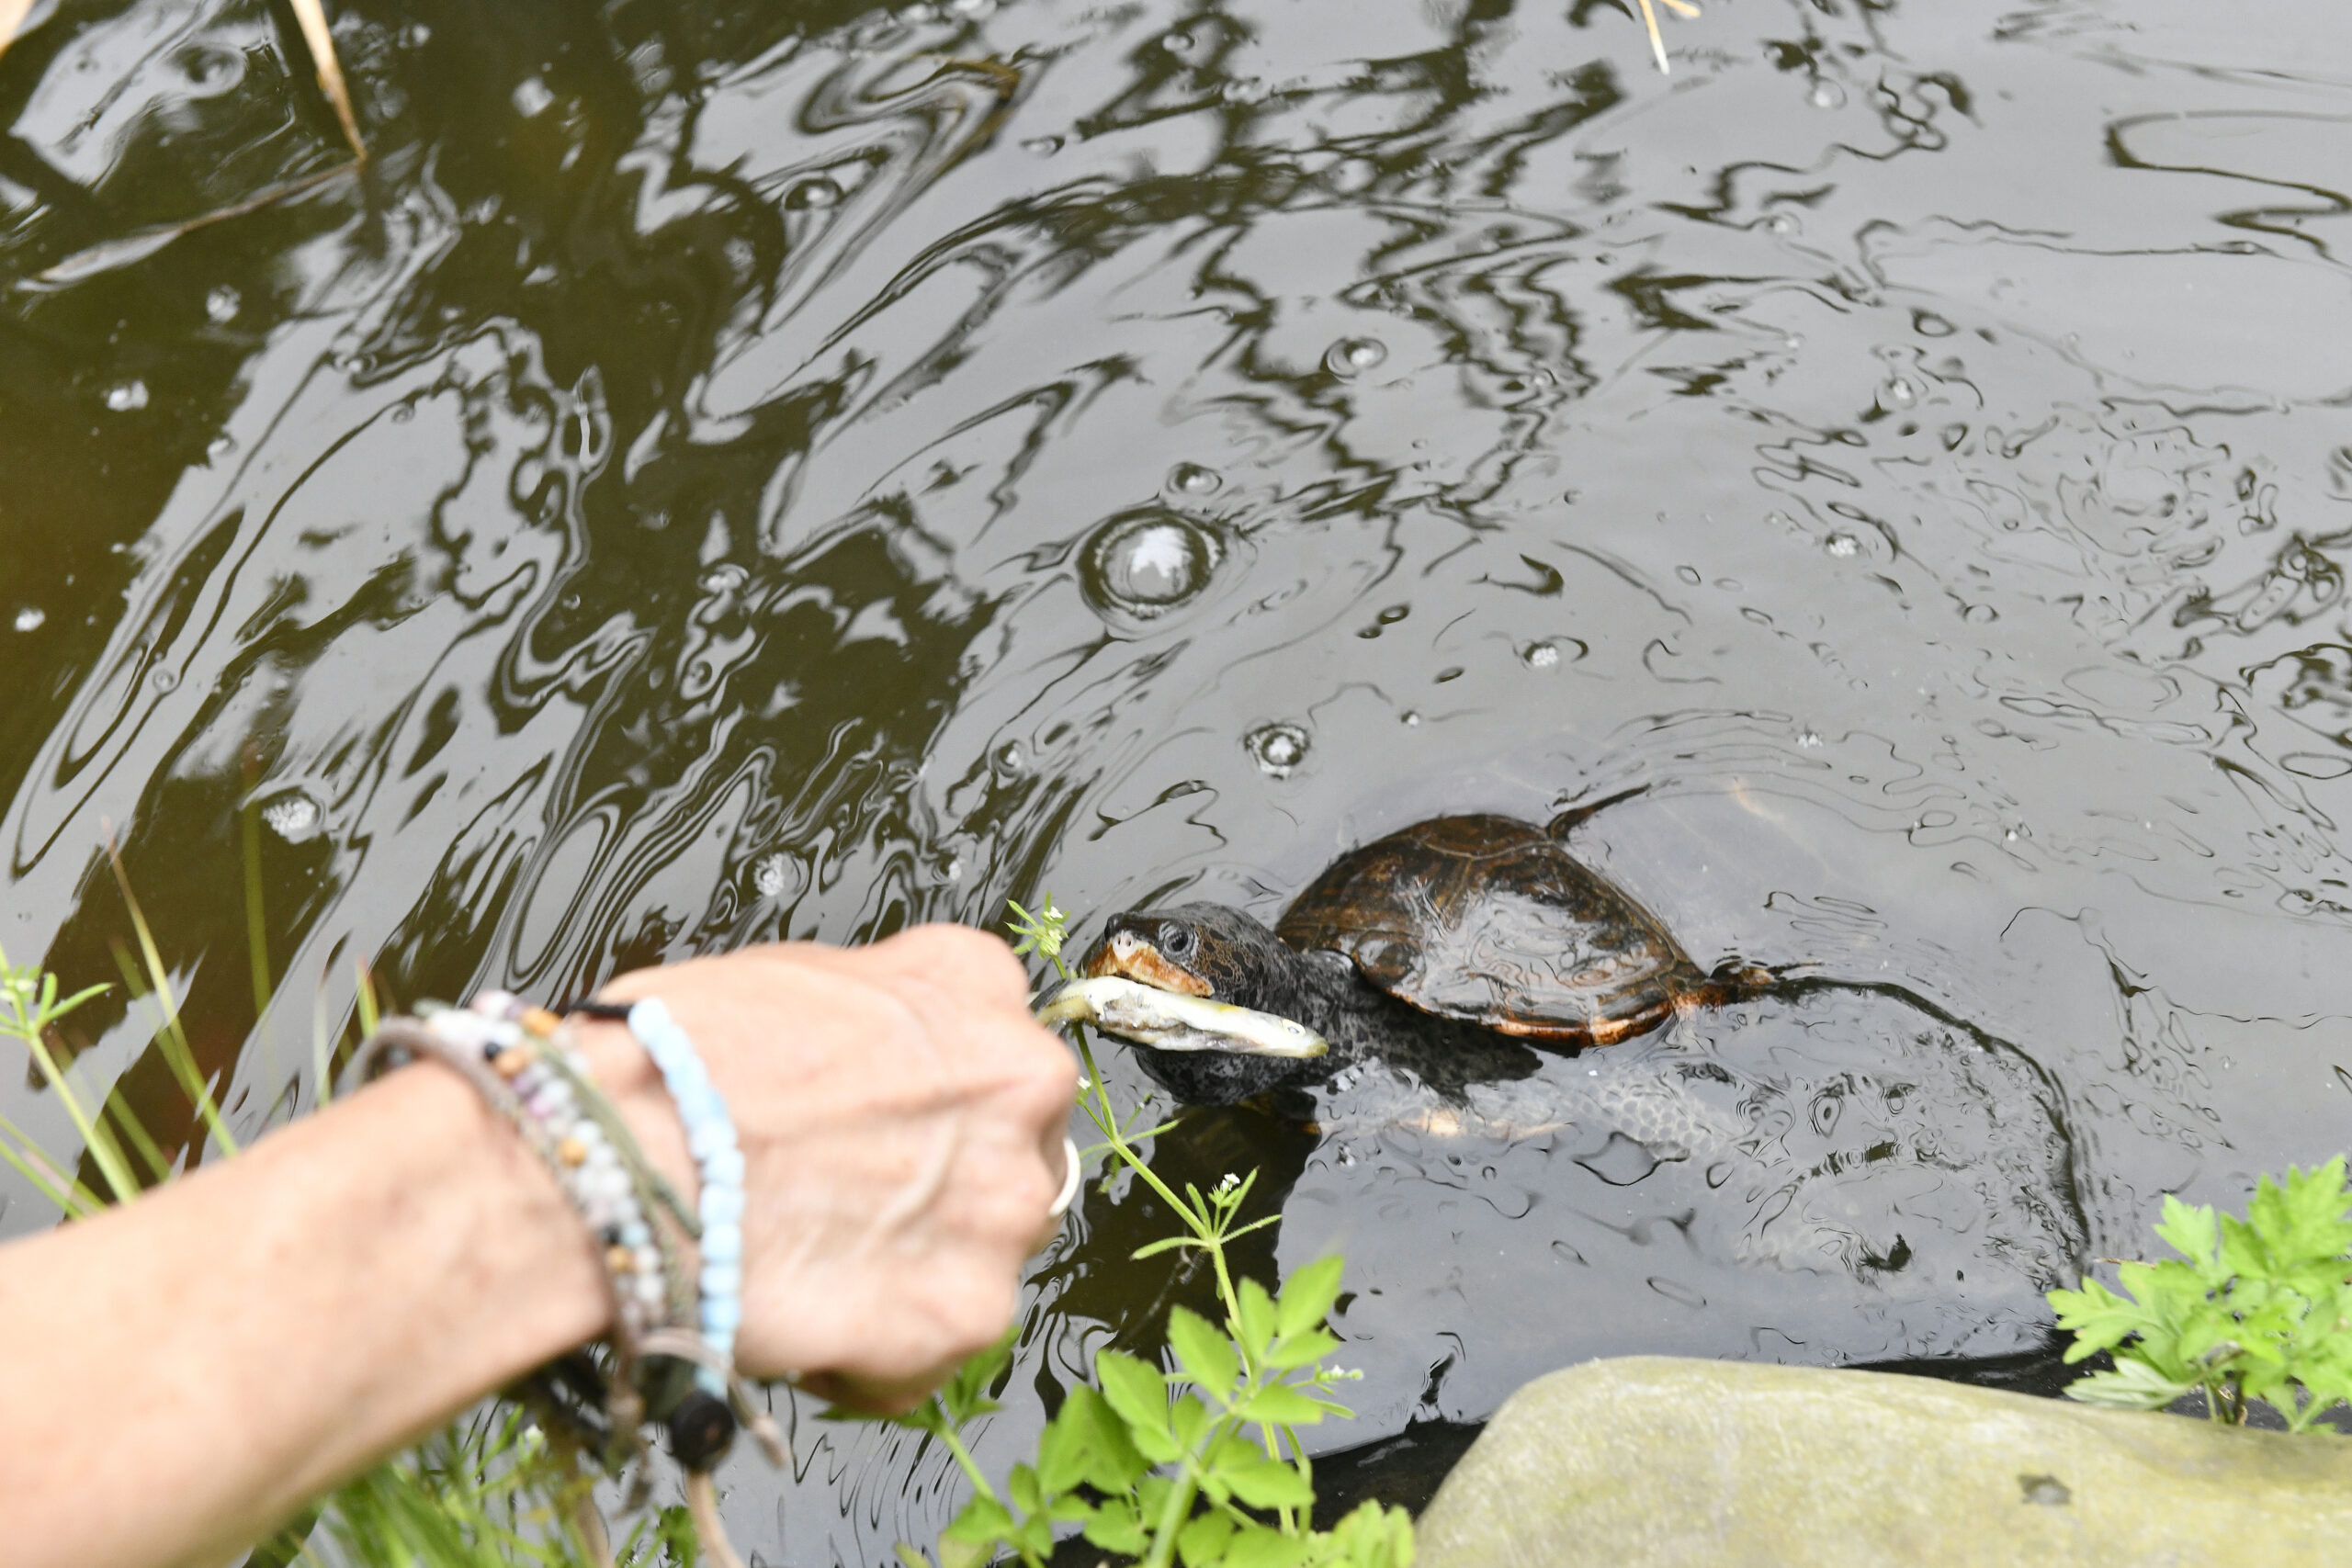 Karen Testa feeds some of the residents at Turtle Rescue of the Hamptons.  DANA SHAW